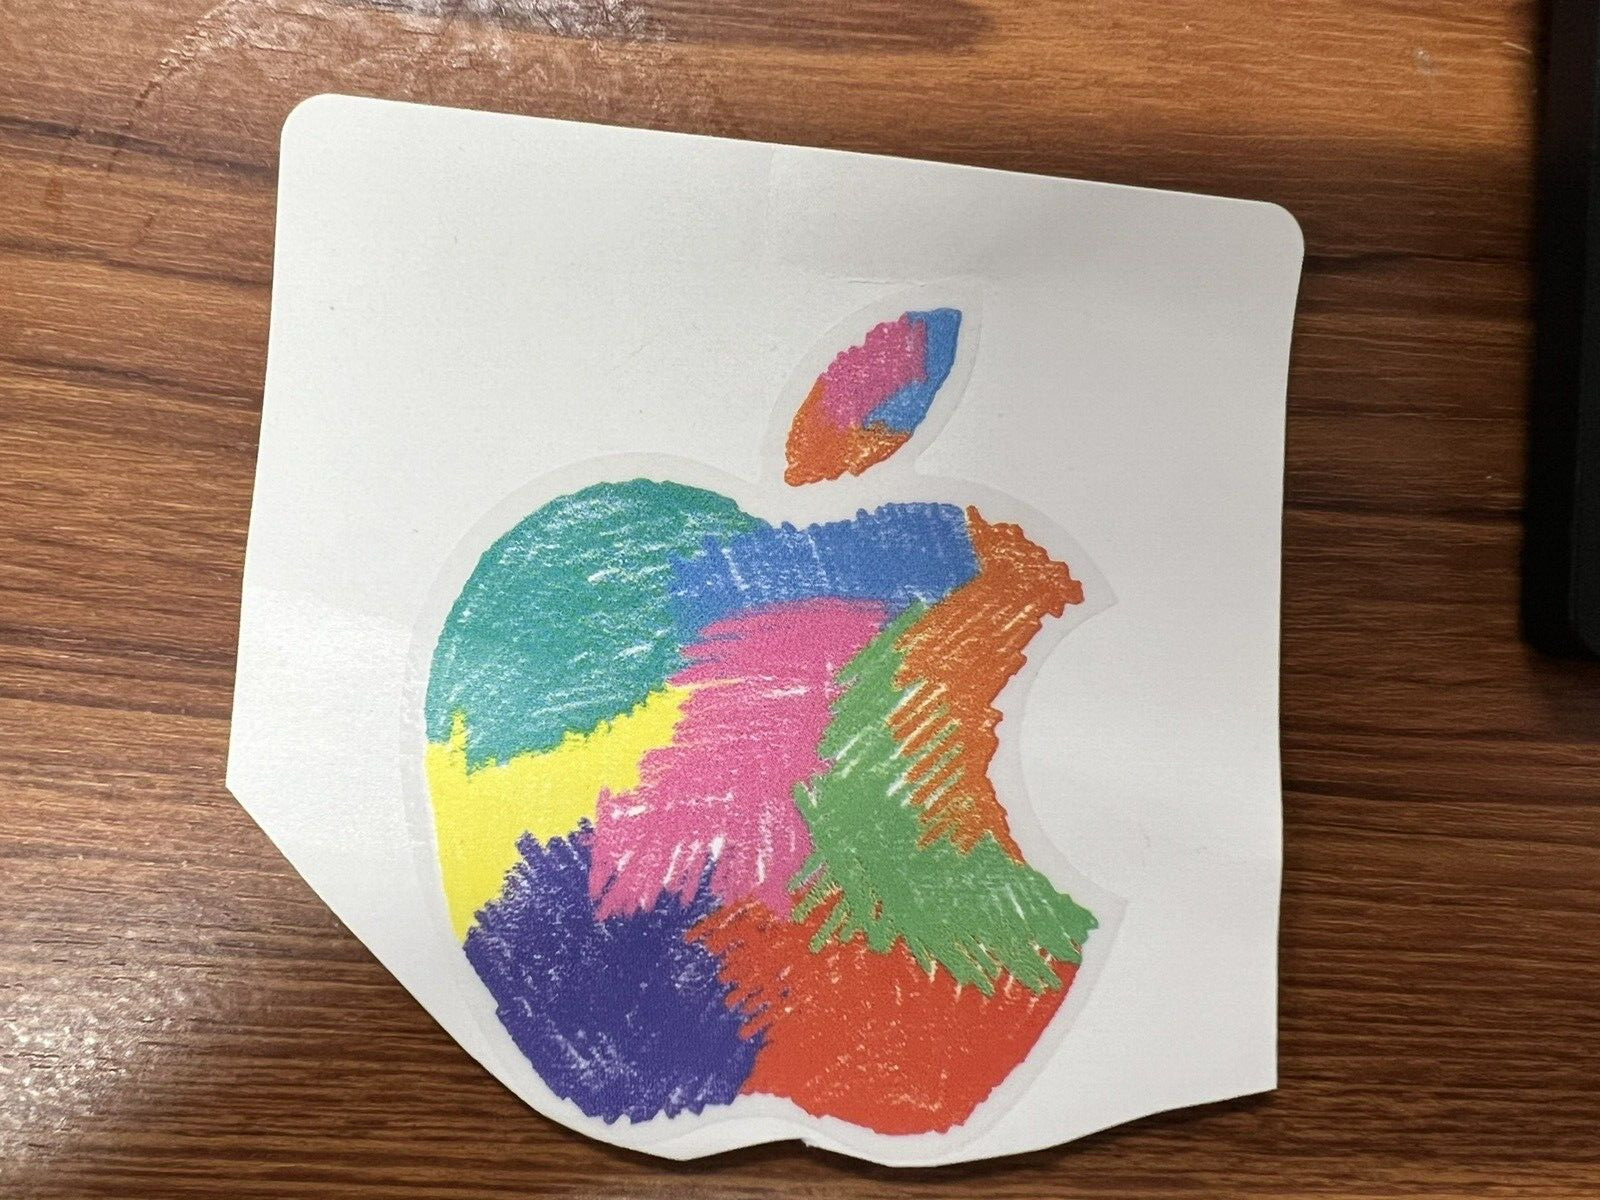 APPLE COLORFUL LOGO DECAL/STICKER FAST SHIP